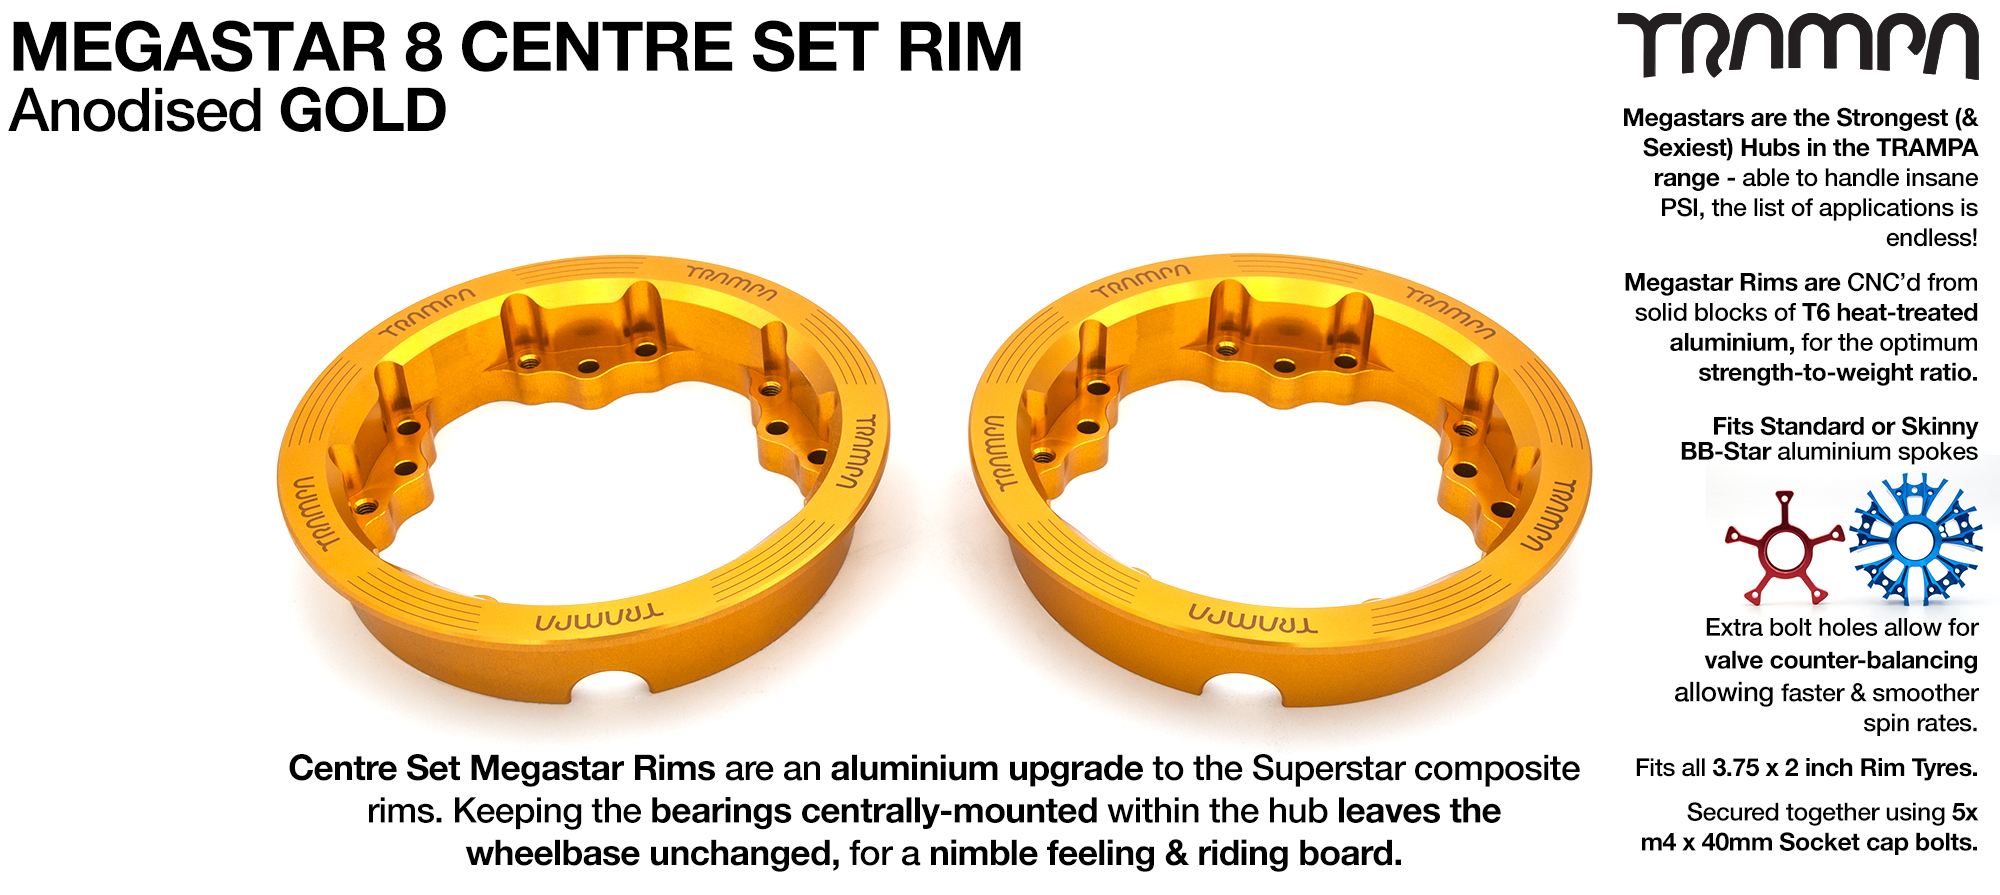 MEGASTAR 8 CS Rims Measure 3.75 x 2 Inch. The bearings are positioned CENTRE-SET & accept all 3.75 Rim Tyres - GOLD 